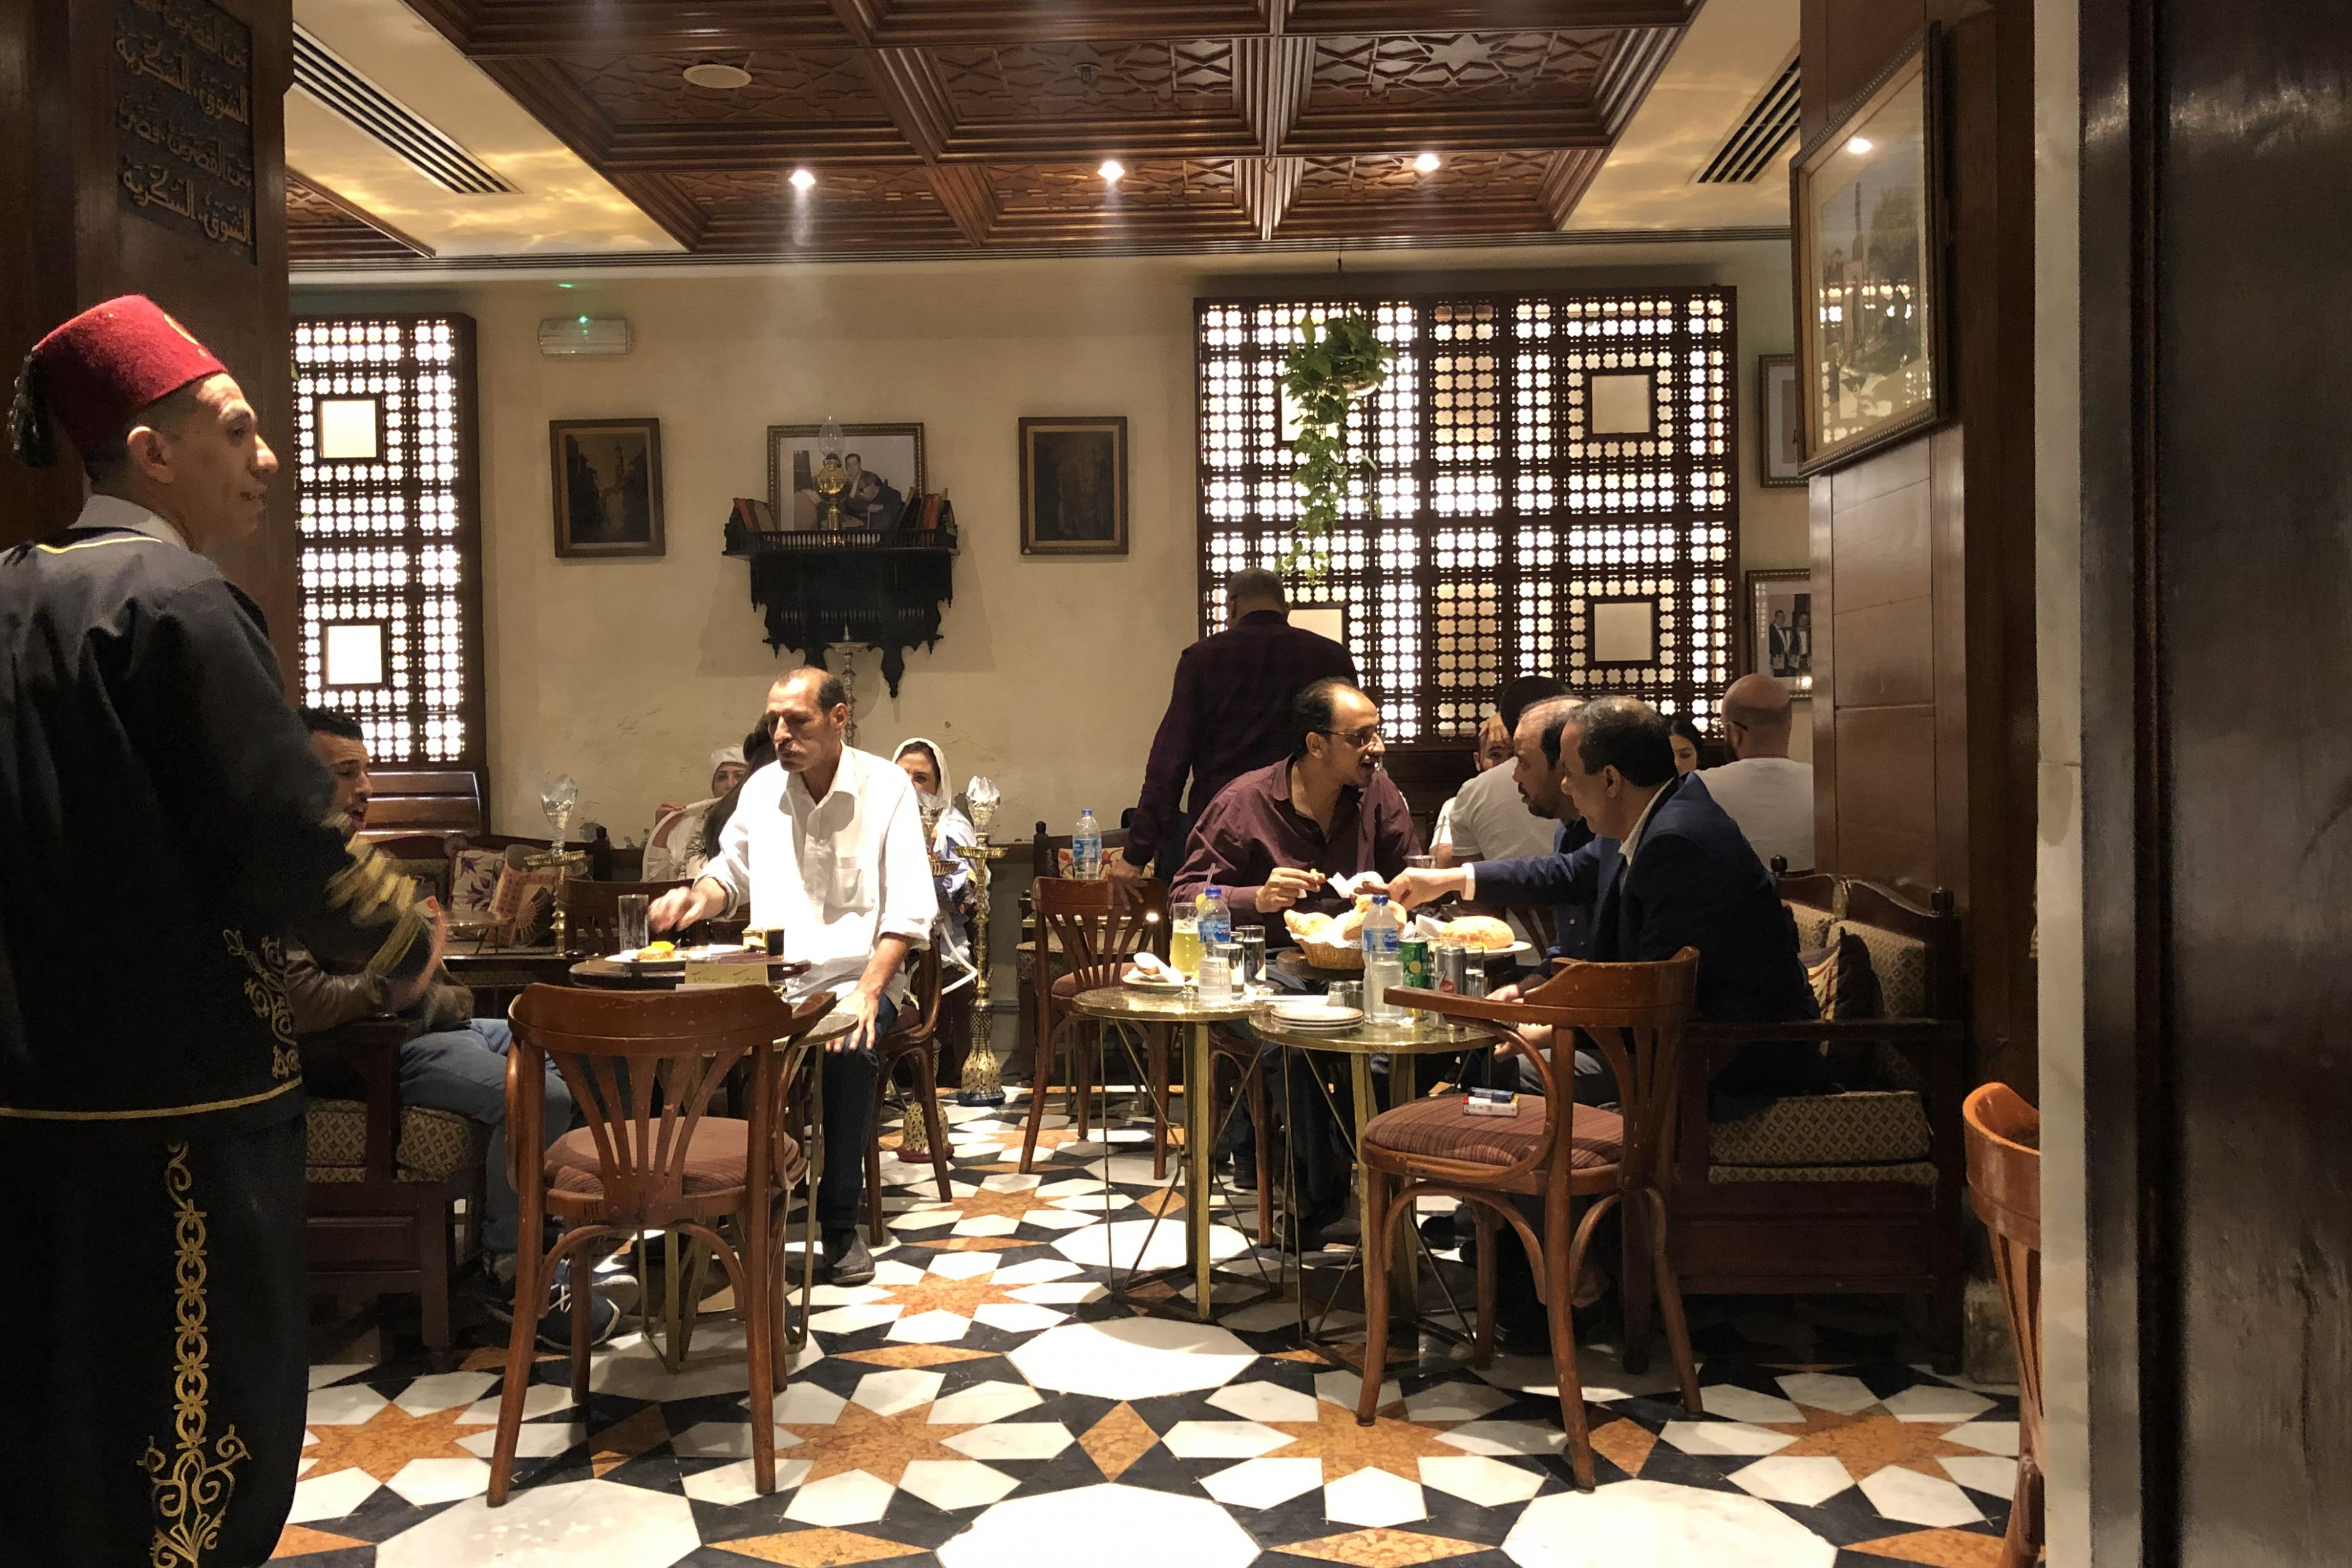 restaurant scene in cairo with many locals eating at wooden tables of nice restaurant with tile floors